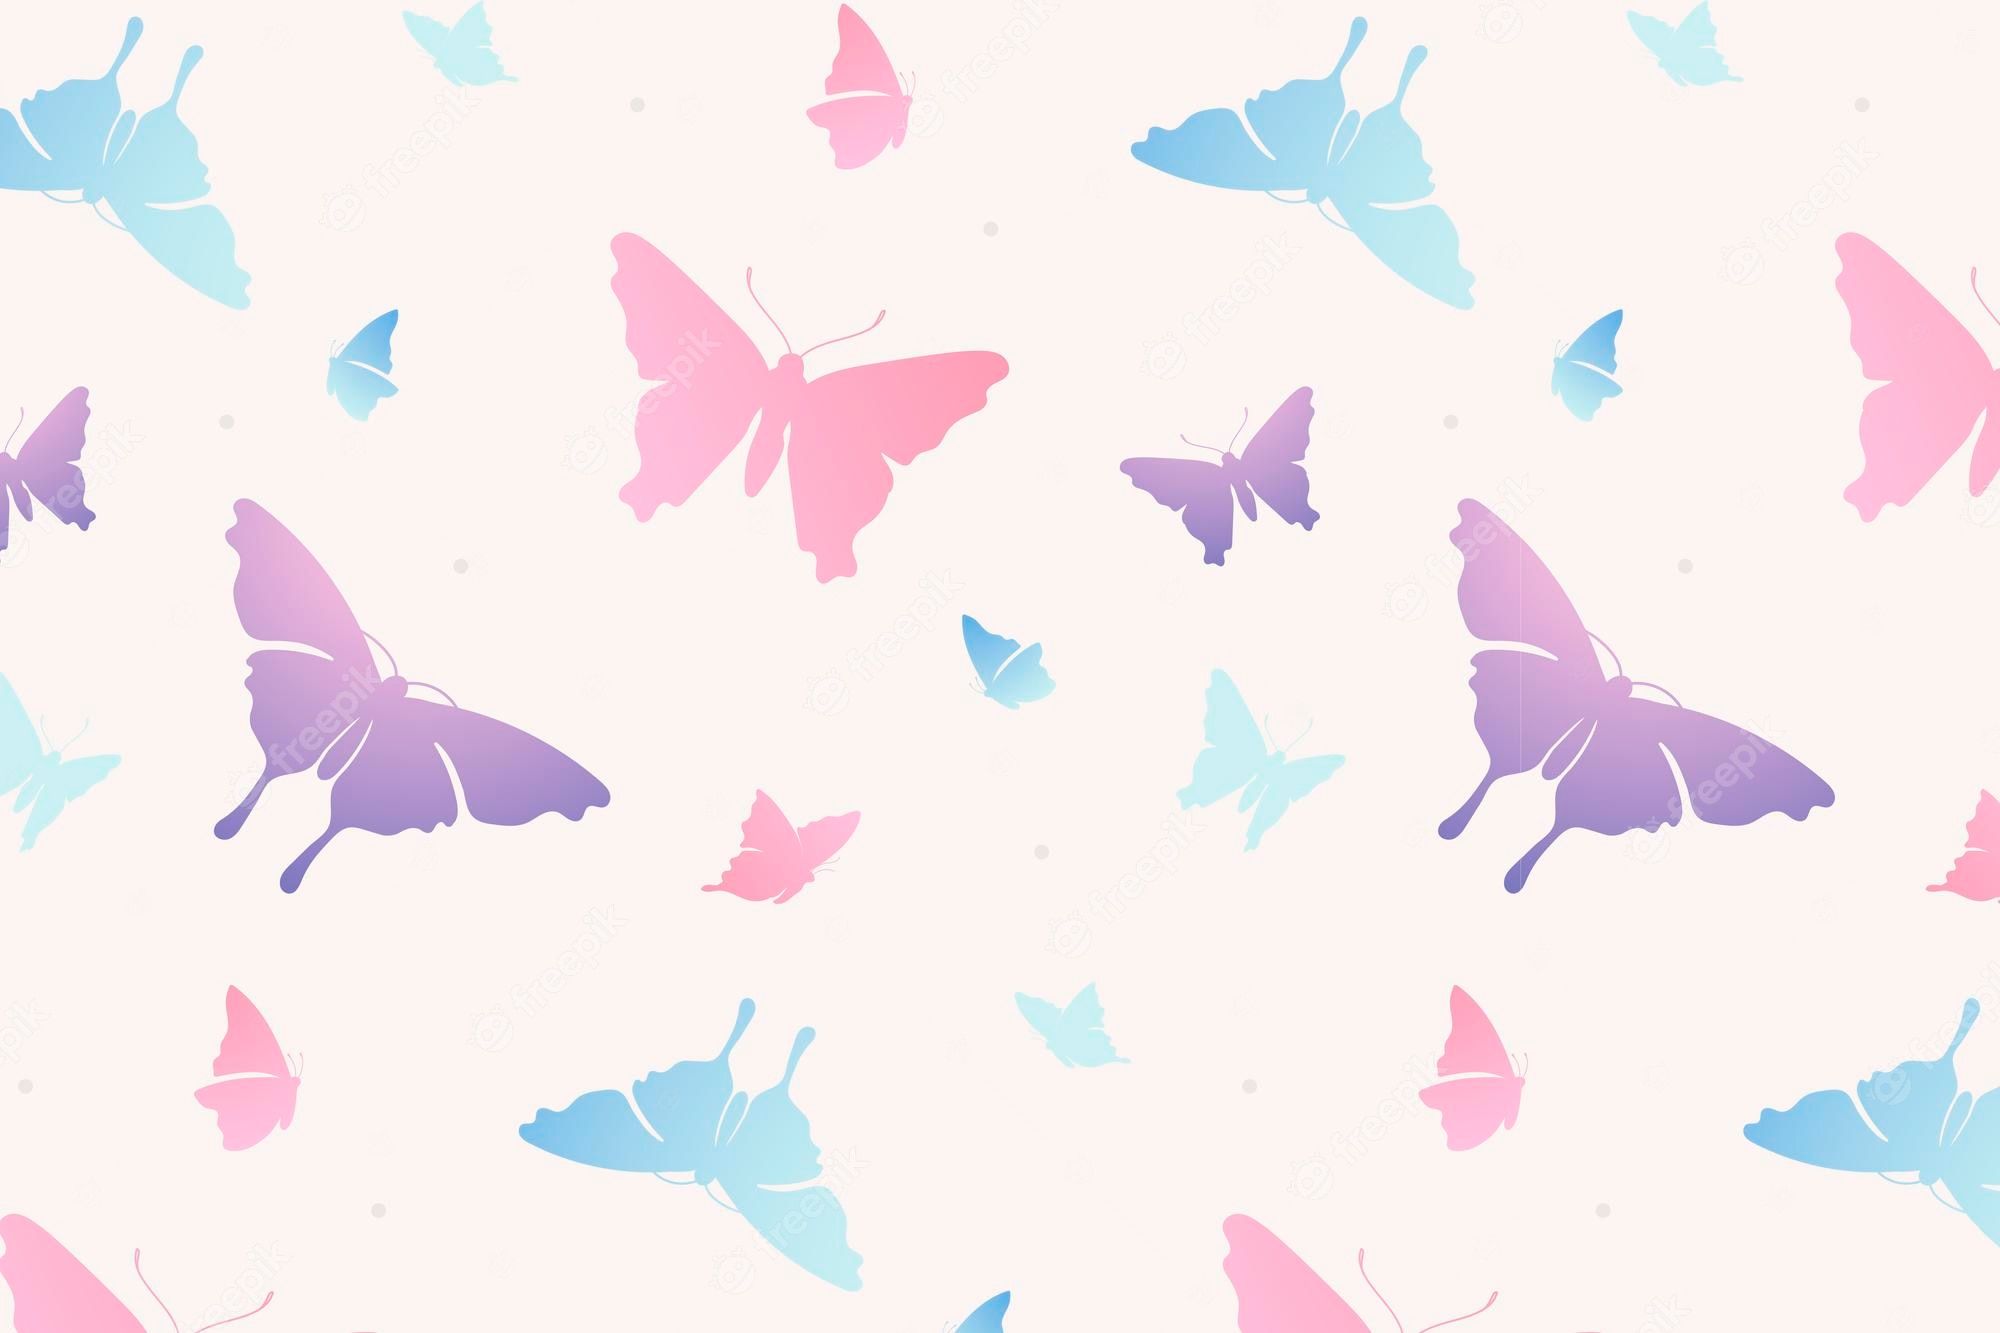 Free Vector. Butterfly pattern background, feminine pink aesthetic vector